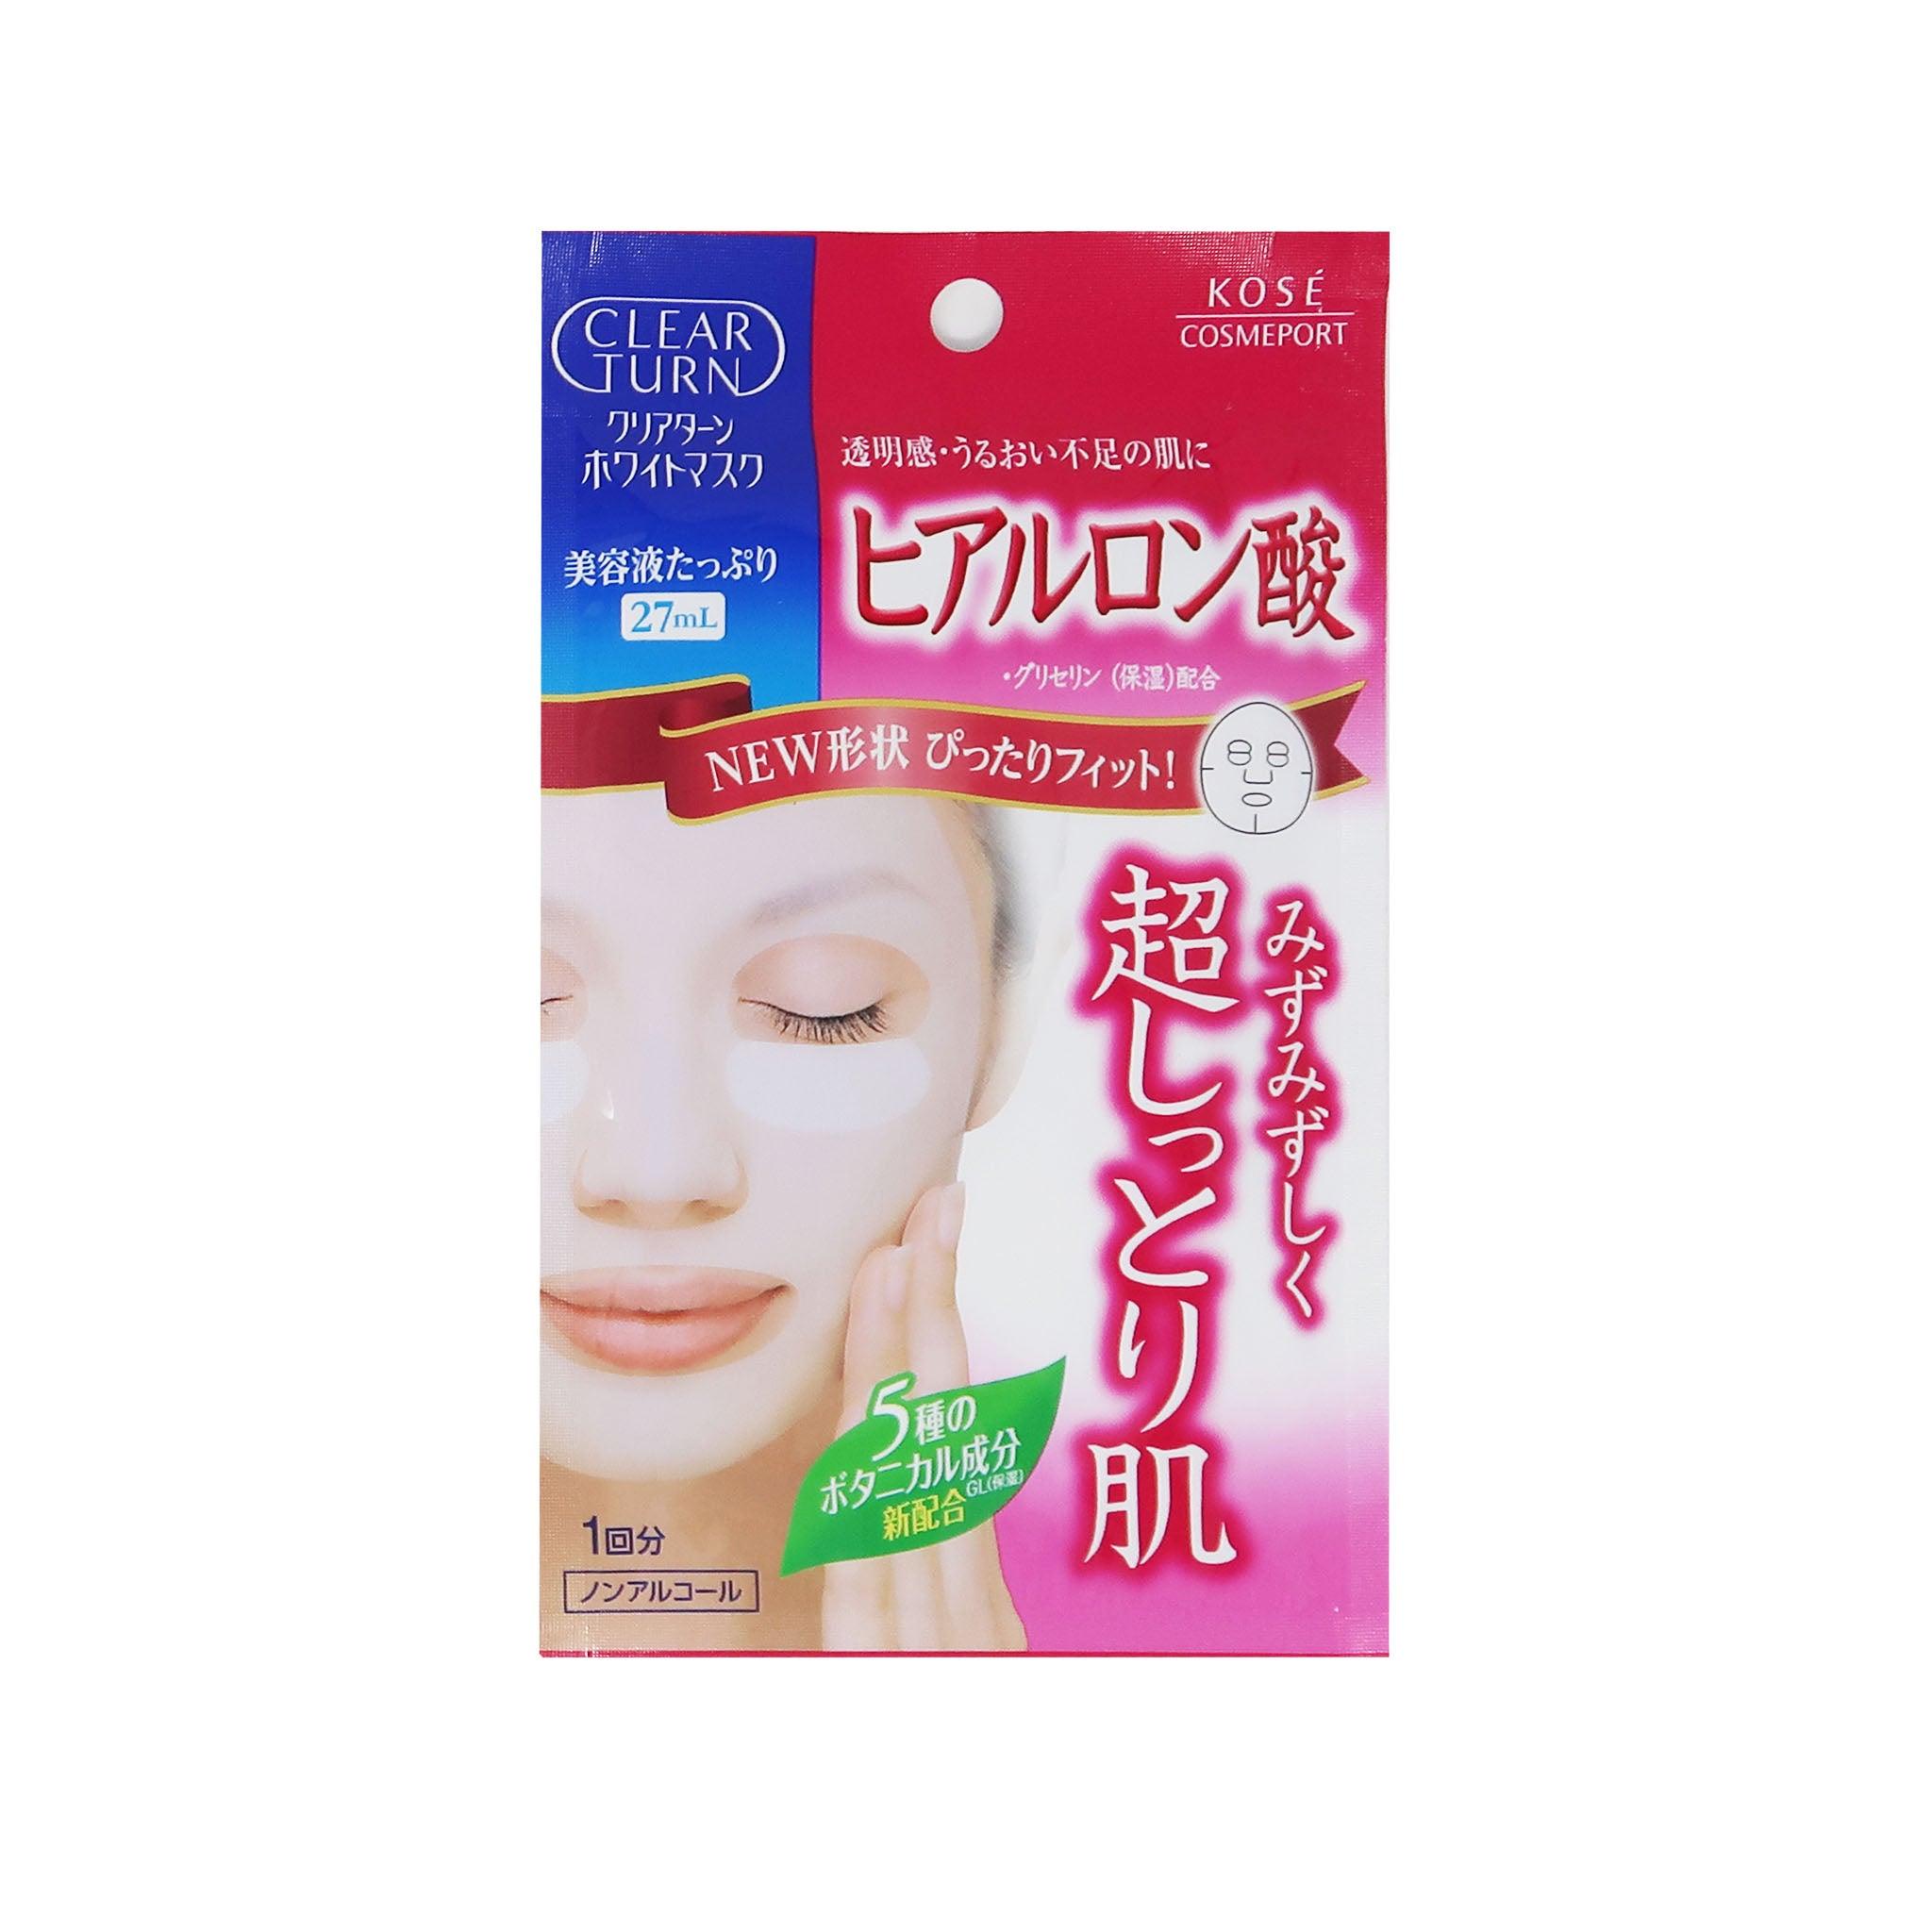 KOSE COSMEPORT Clear Turn White Mask-Hyaluronic Acid [1PC]